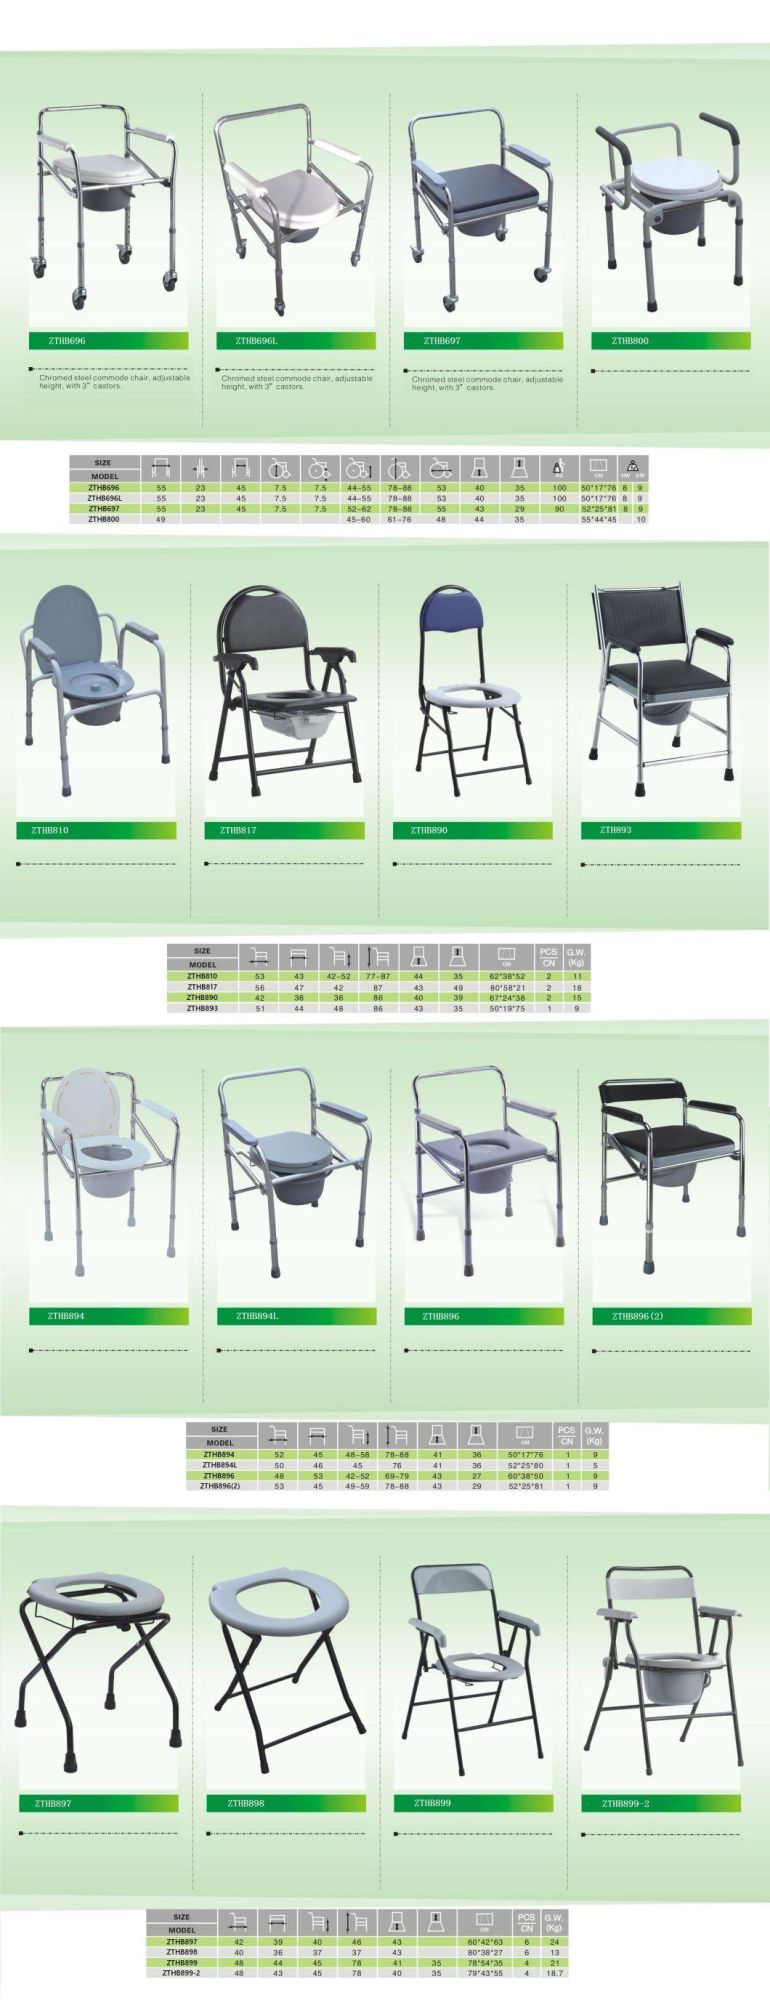 Home Care with Wheel Height Adjust Lightweight Safety Toilet Seat Elderly/Disable Patient People Rehabilitation Products Steel Nursing Commode Chair